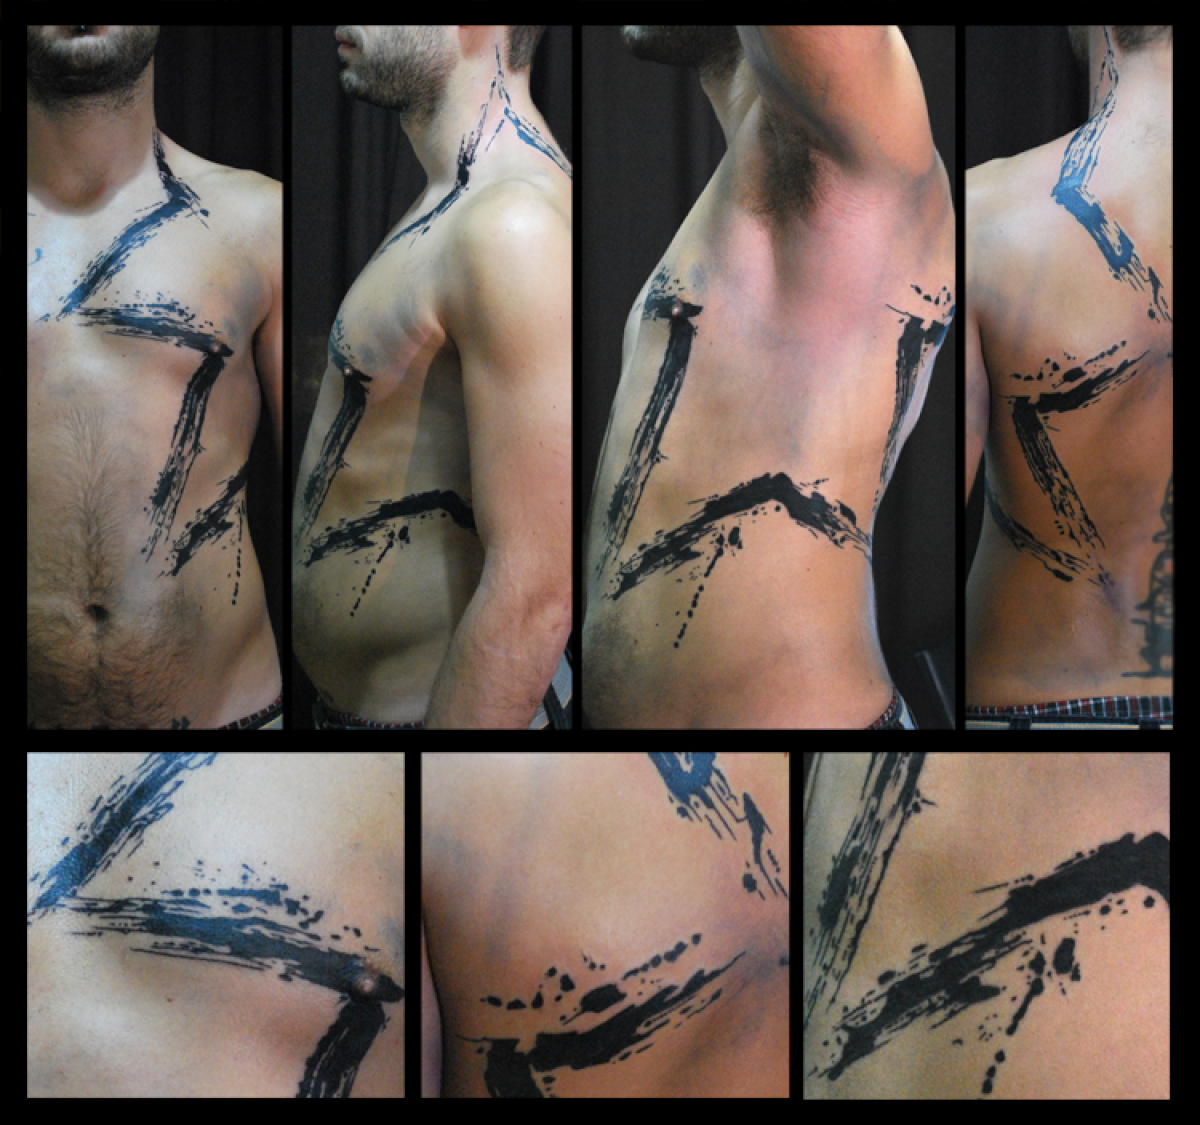 Body Black Star tattoo by Live Two